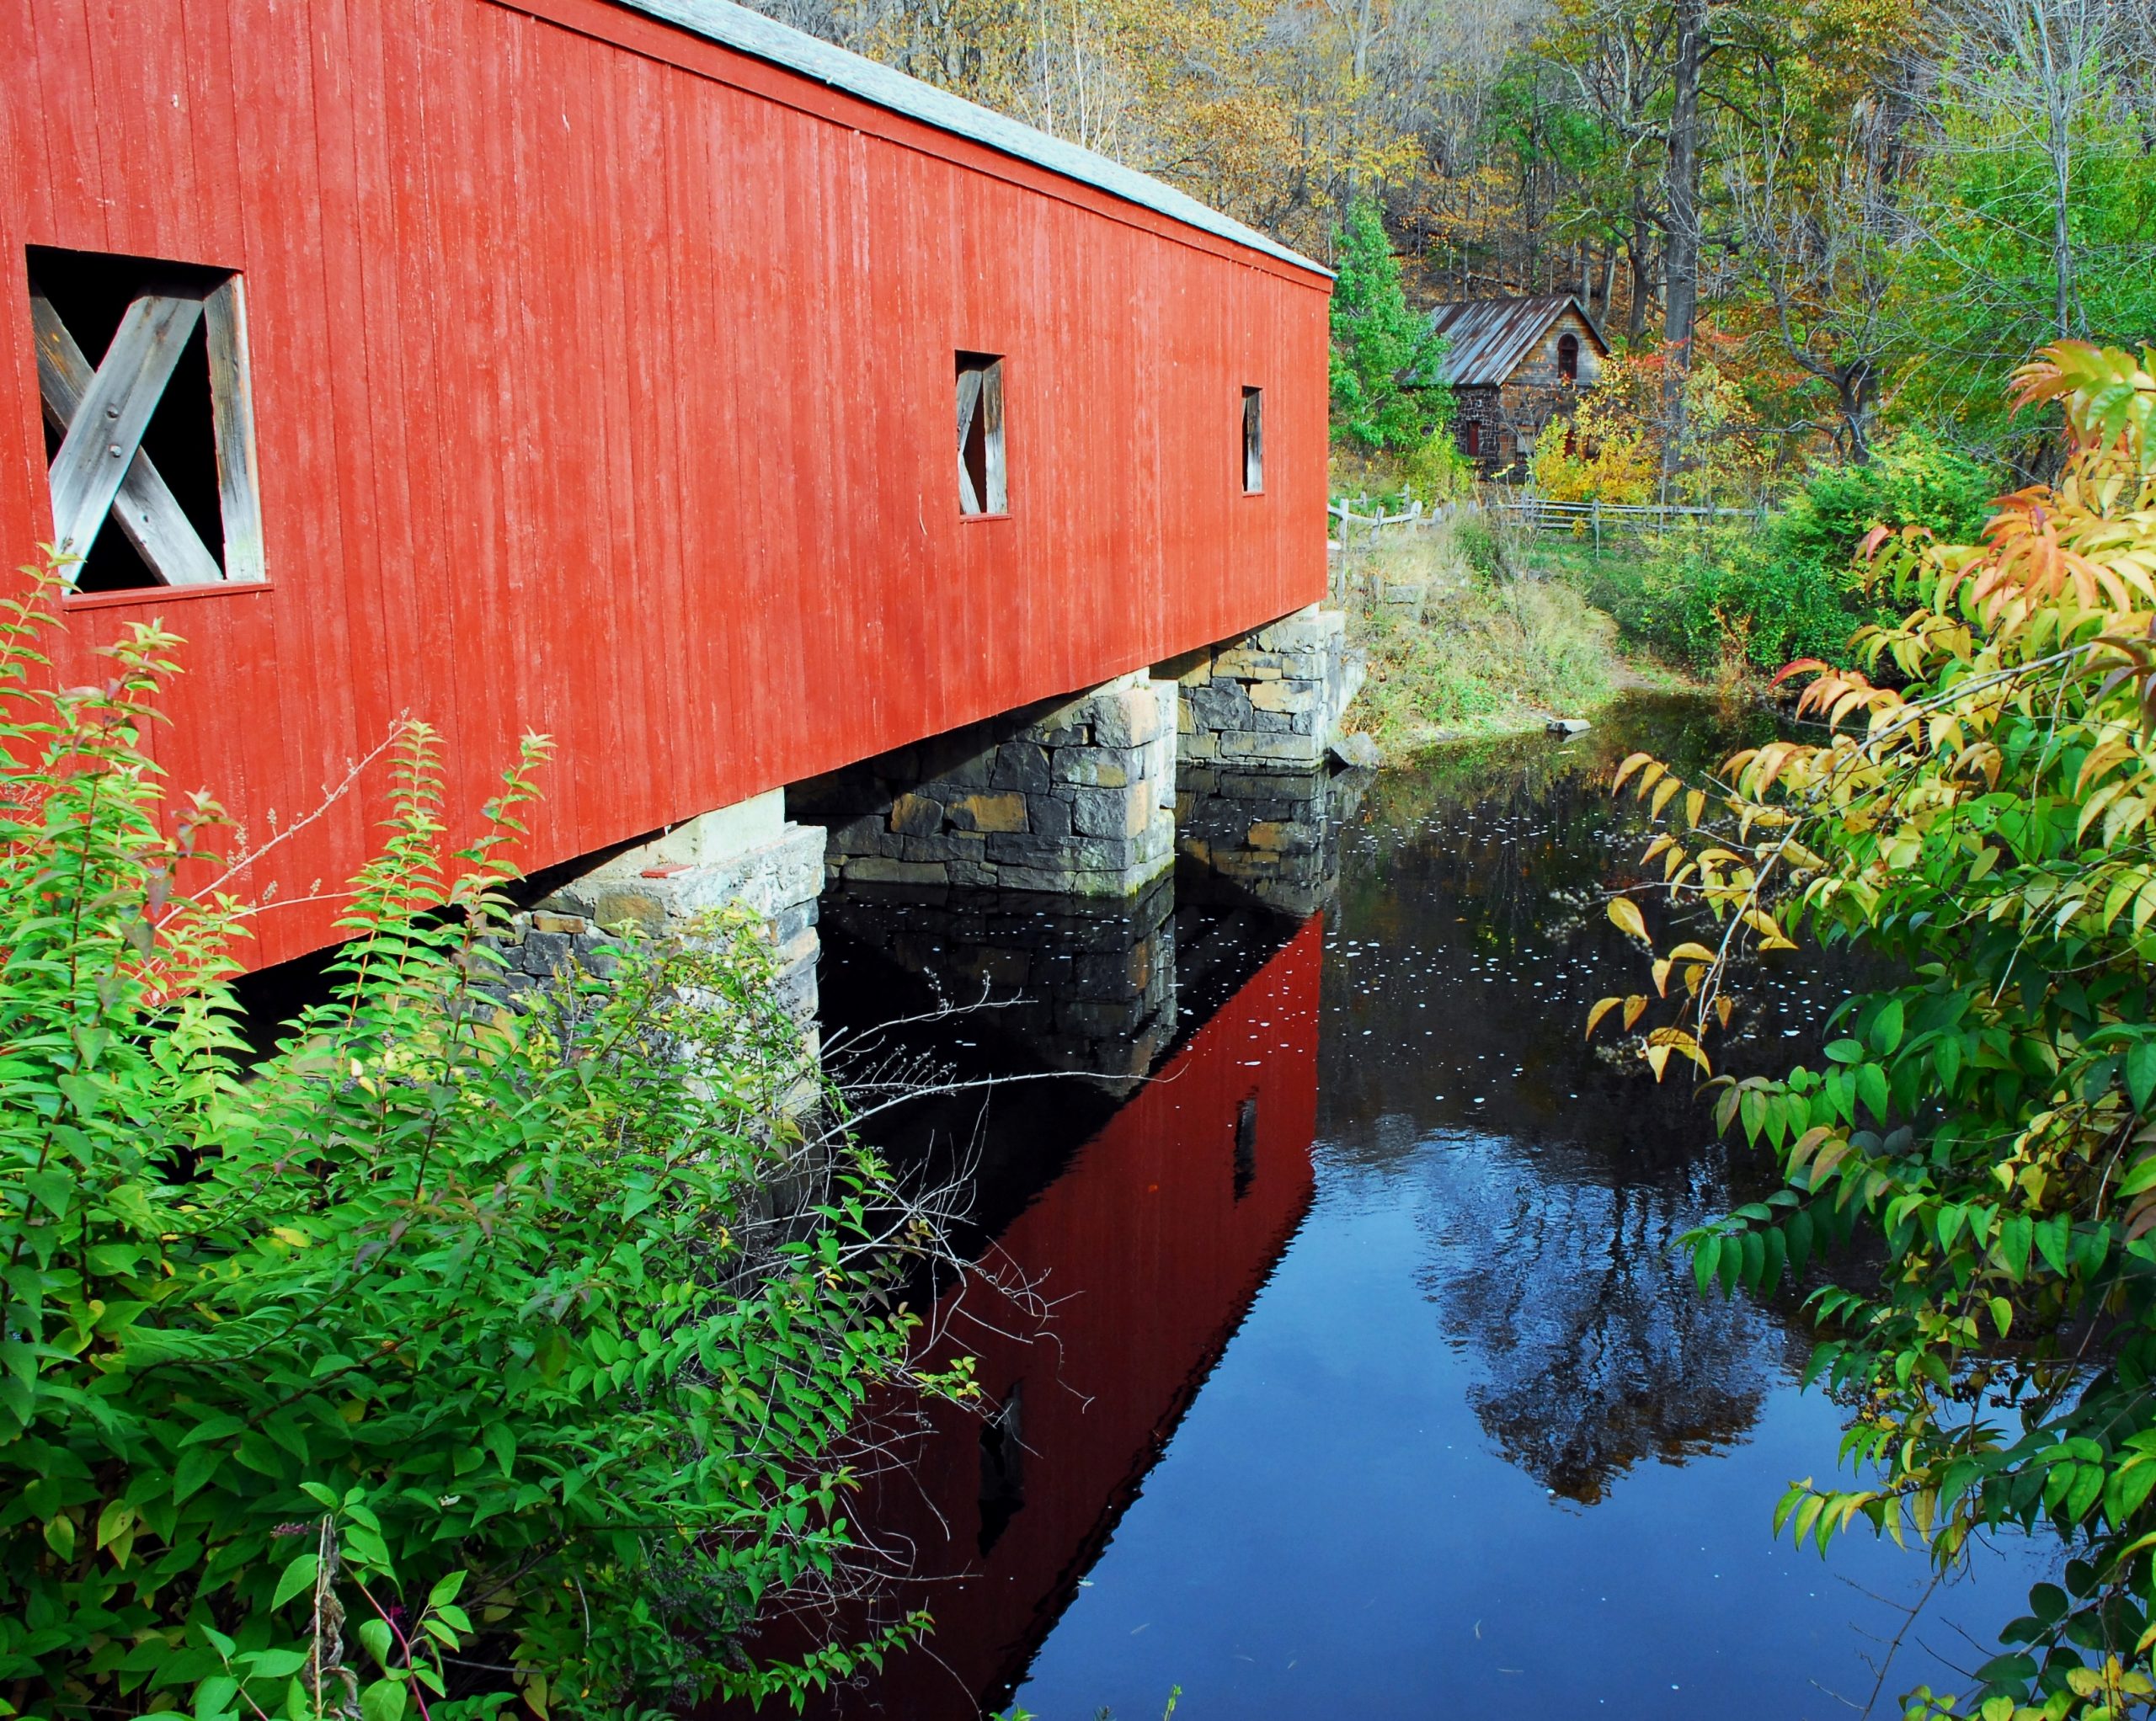 Walking Covered Bridge In Hamden, Ct (user submitted)